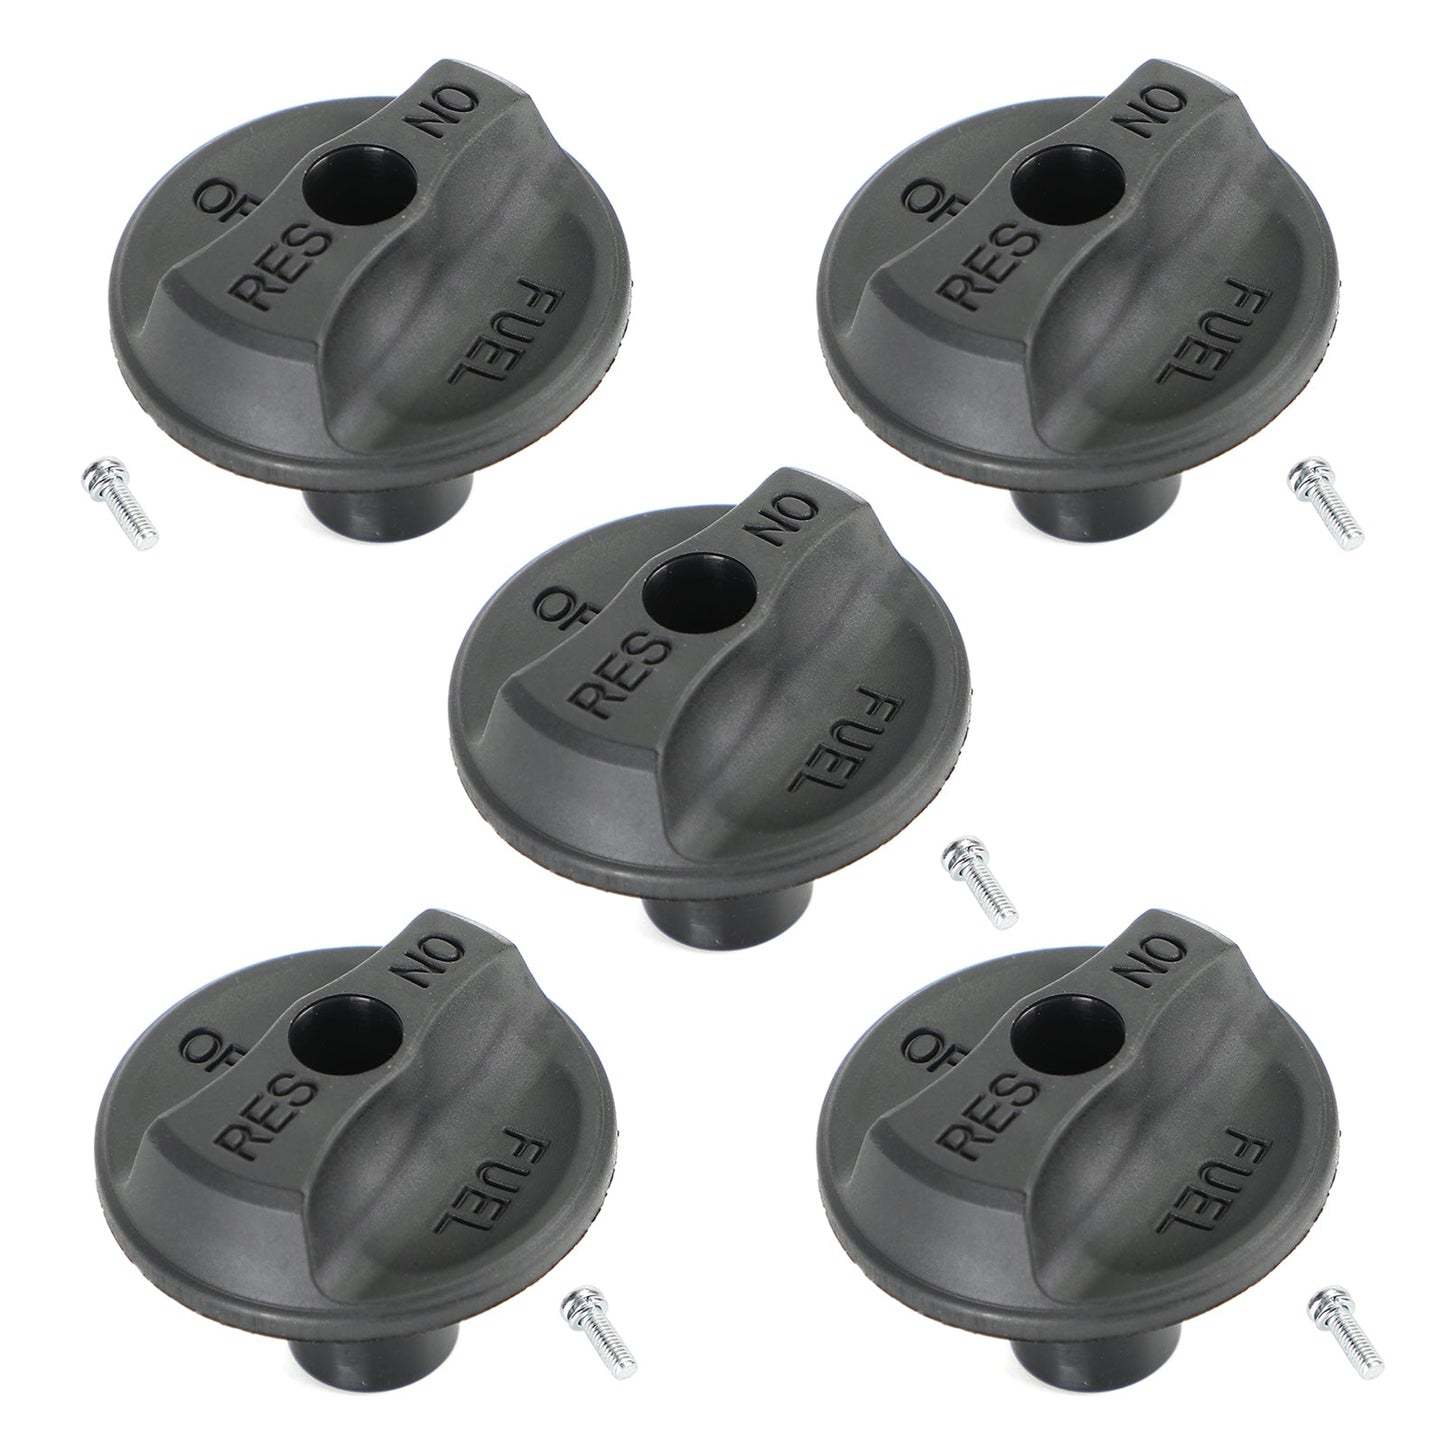 Fuel Petcock ON/OFF/RES Turn Switch Knob For Arctic Cat 250 300 400 500 0470-408